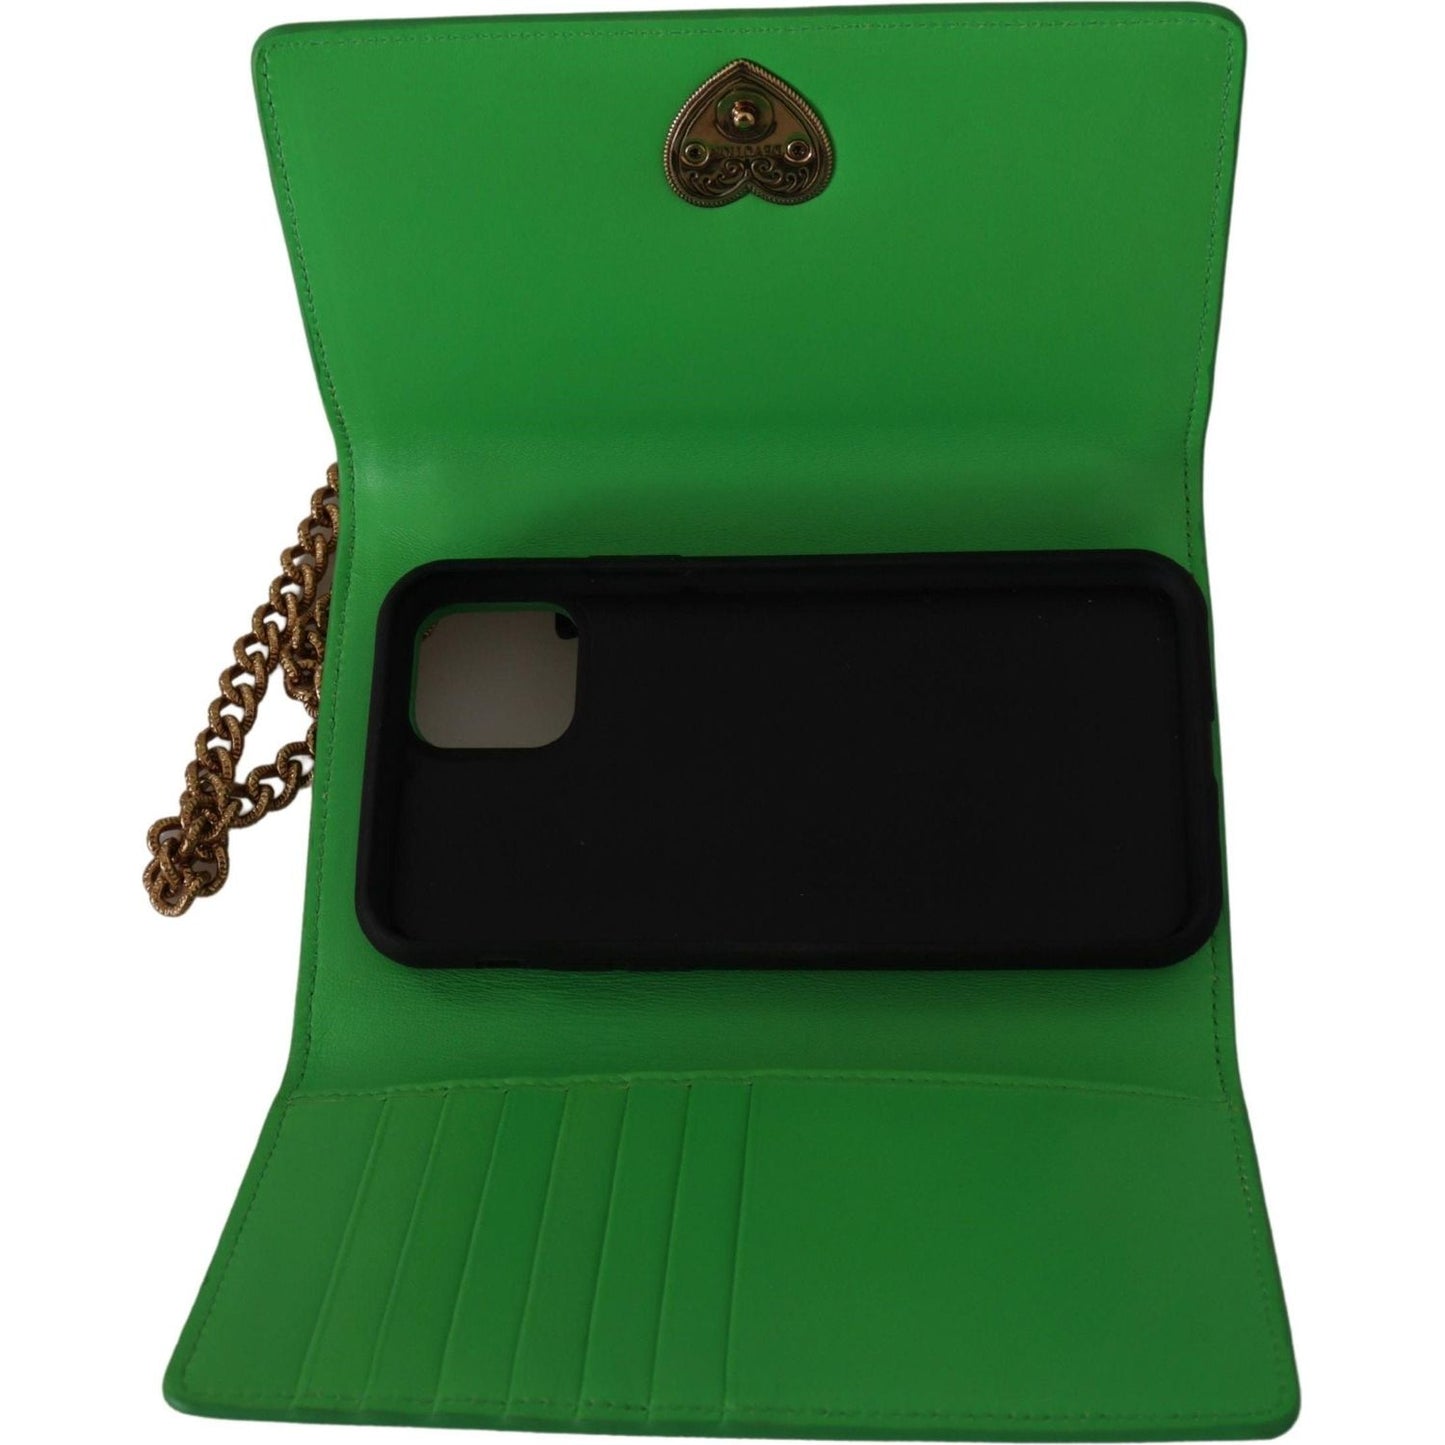 Dolce & Gabbana Elegant Leather iPhone Wallet Case with Chain green-leather-devotion-cardholder-iphone-11-pro-wallet IMG_3544-42f5843a-c44.jpg